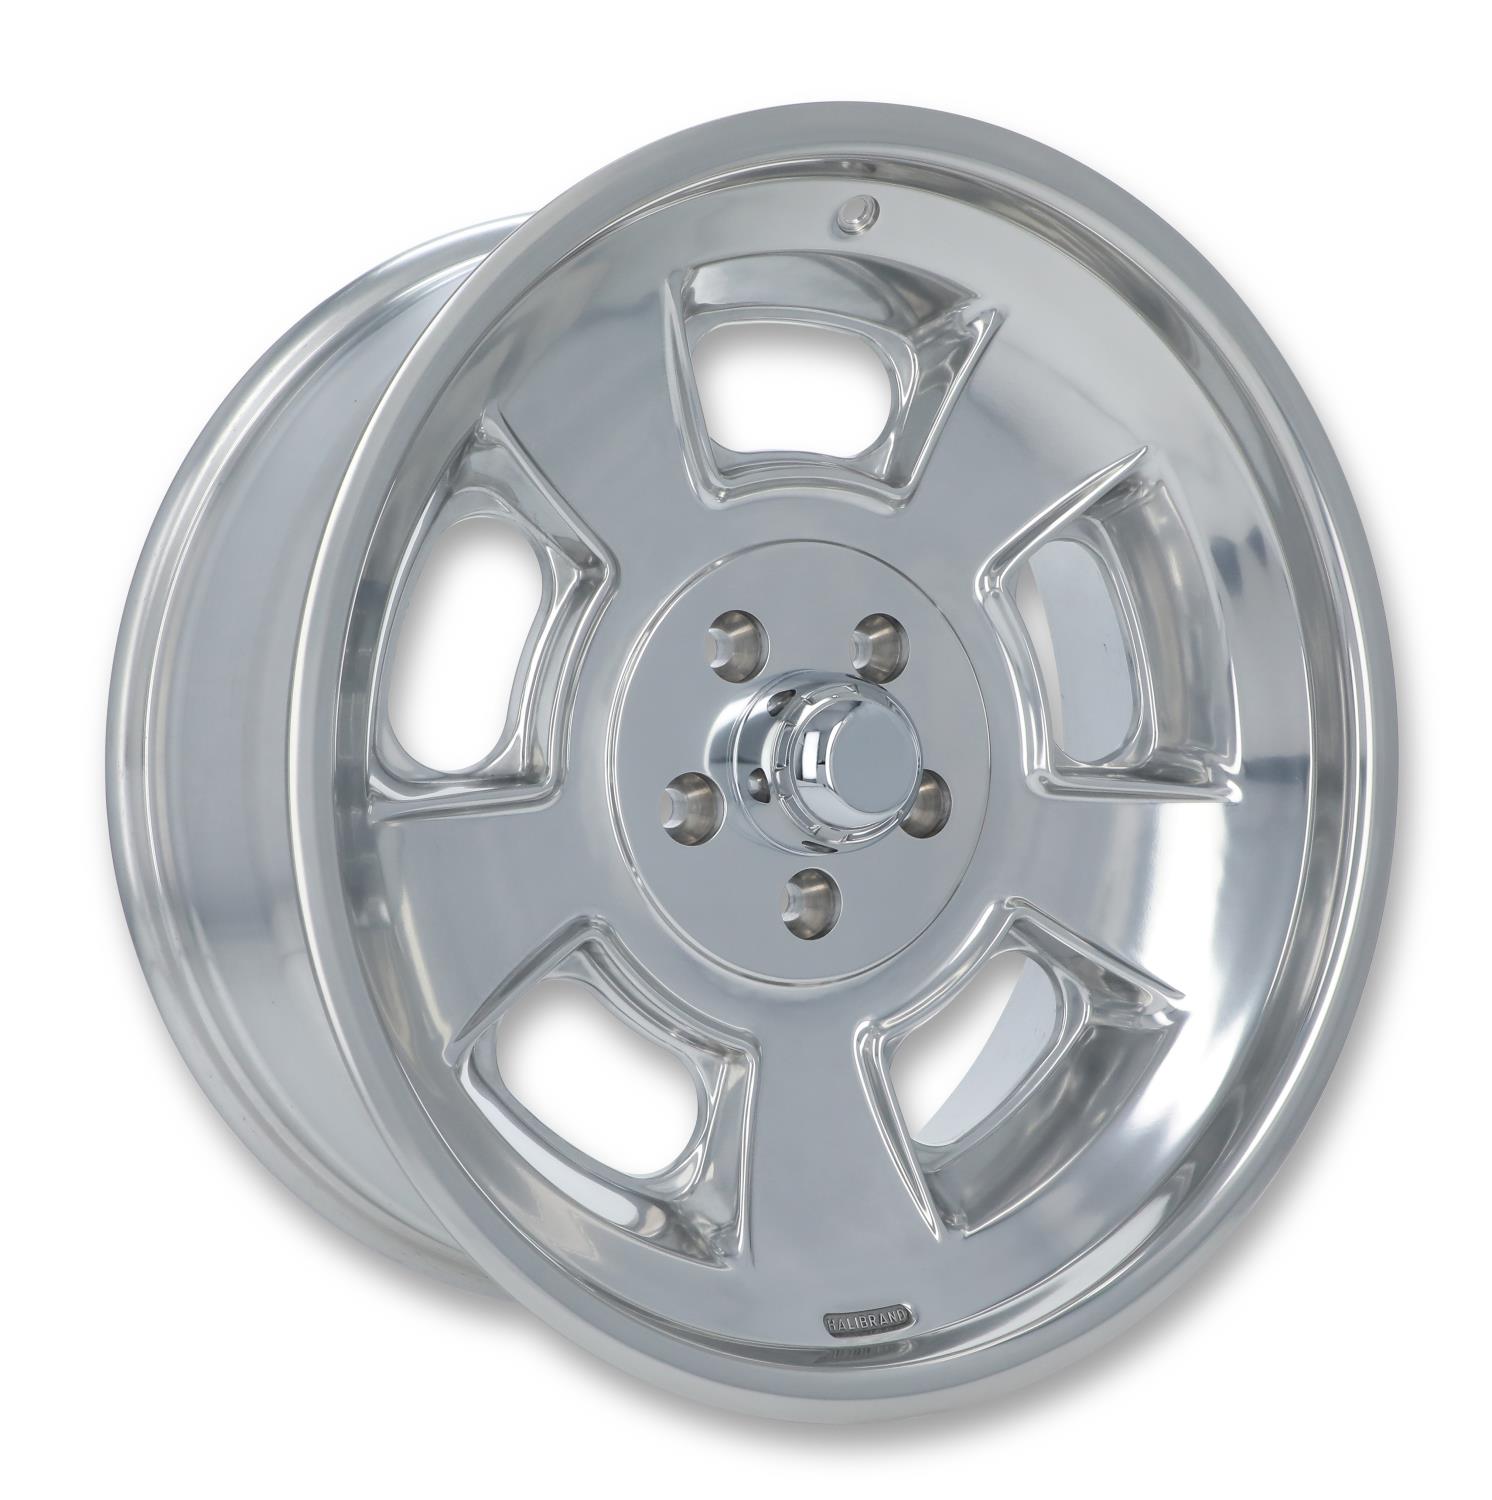 Sprint Front Wheel, Size: 20x8.5", Bolt Pattern: 5x5", Backspace: 4.75" [Polished - Gloss Clearcoat]